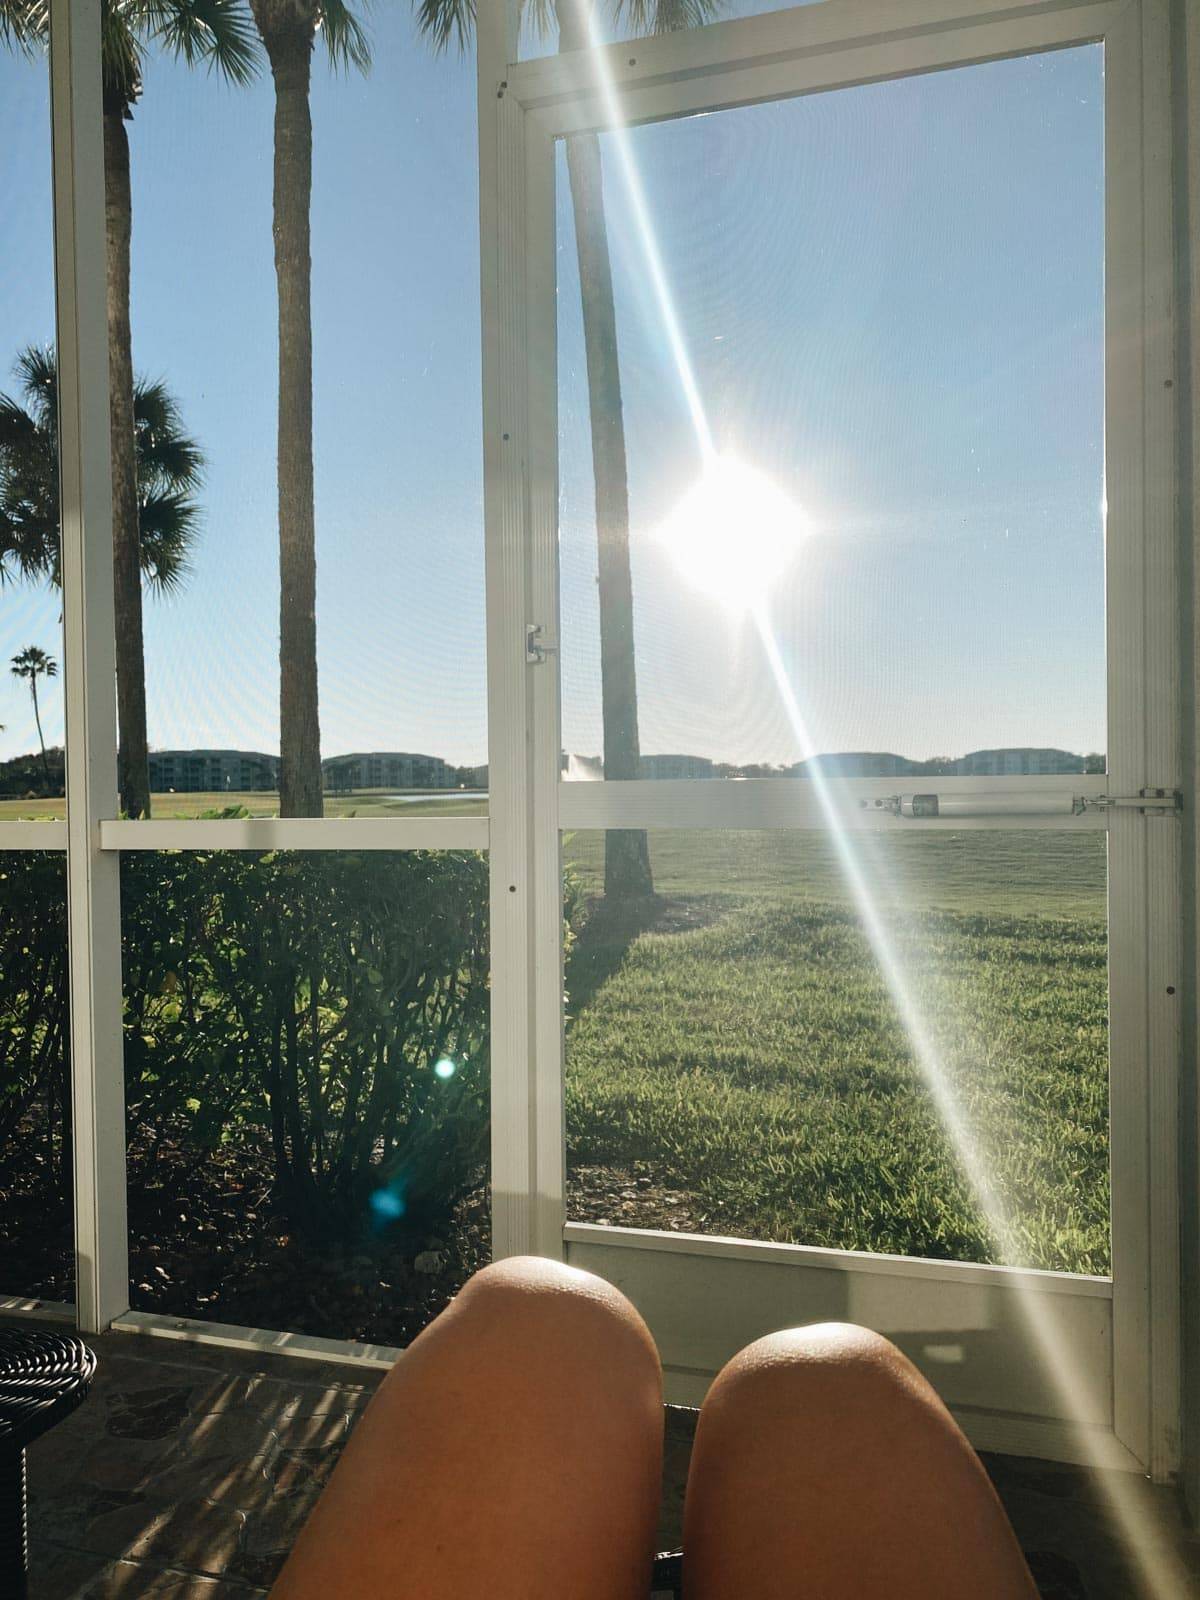 A person's knees point towards a sunny yard.